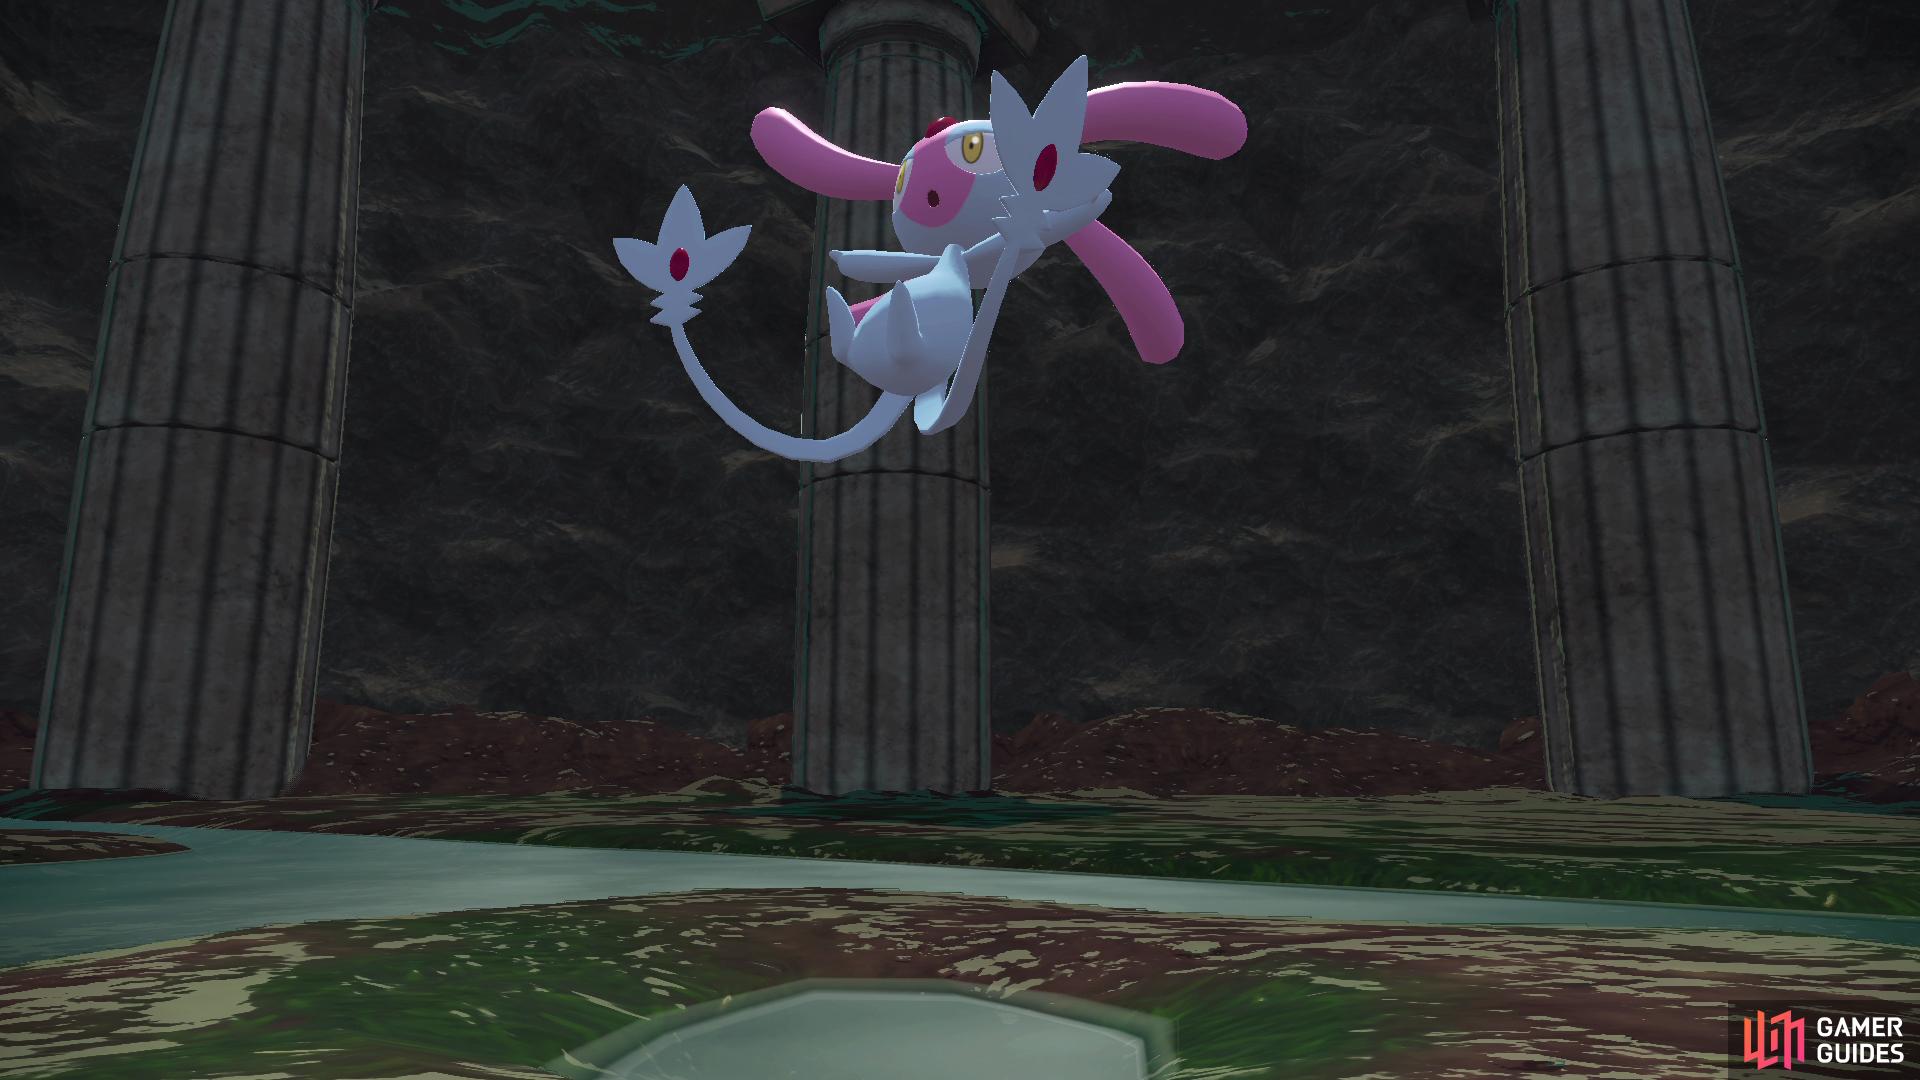 Mesprit can be caught in the post-game.